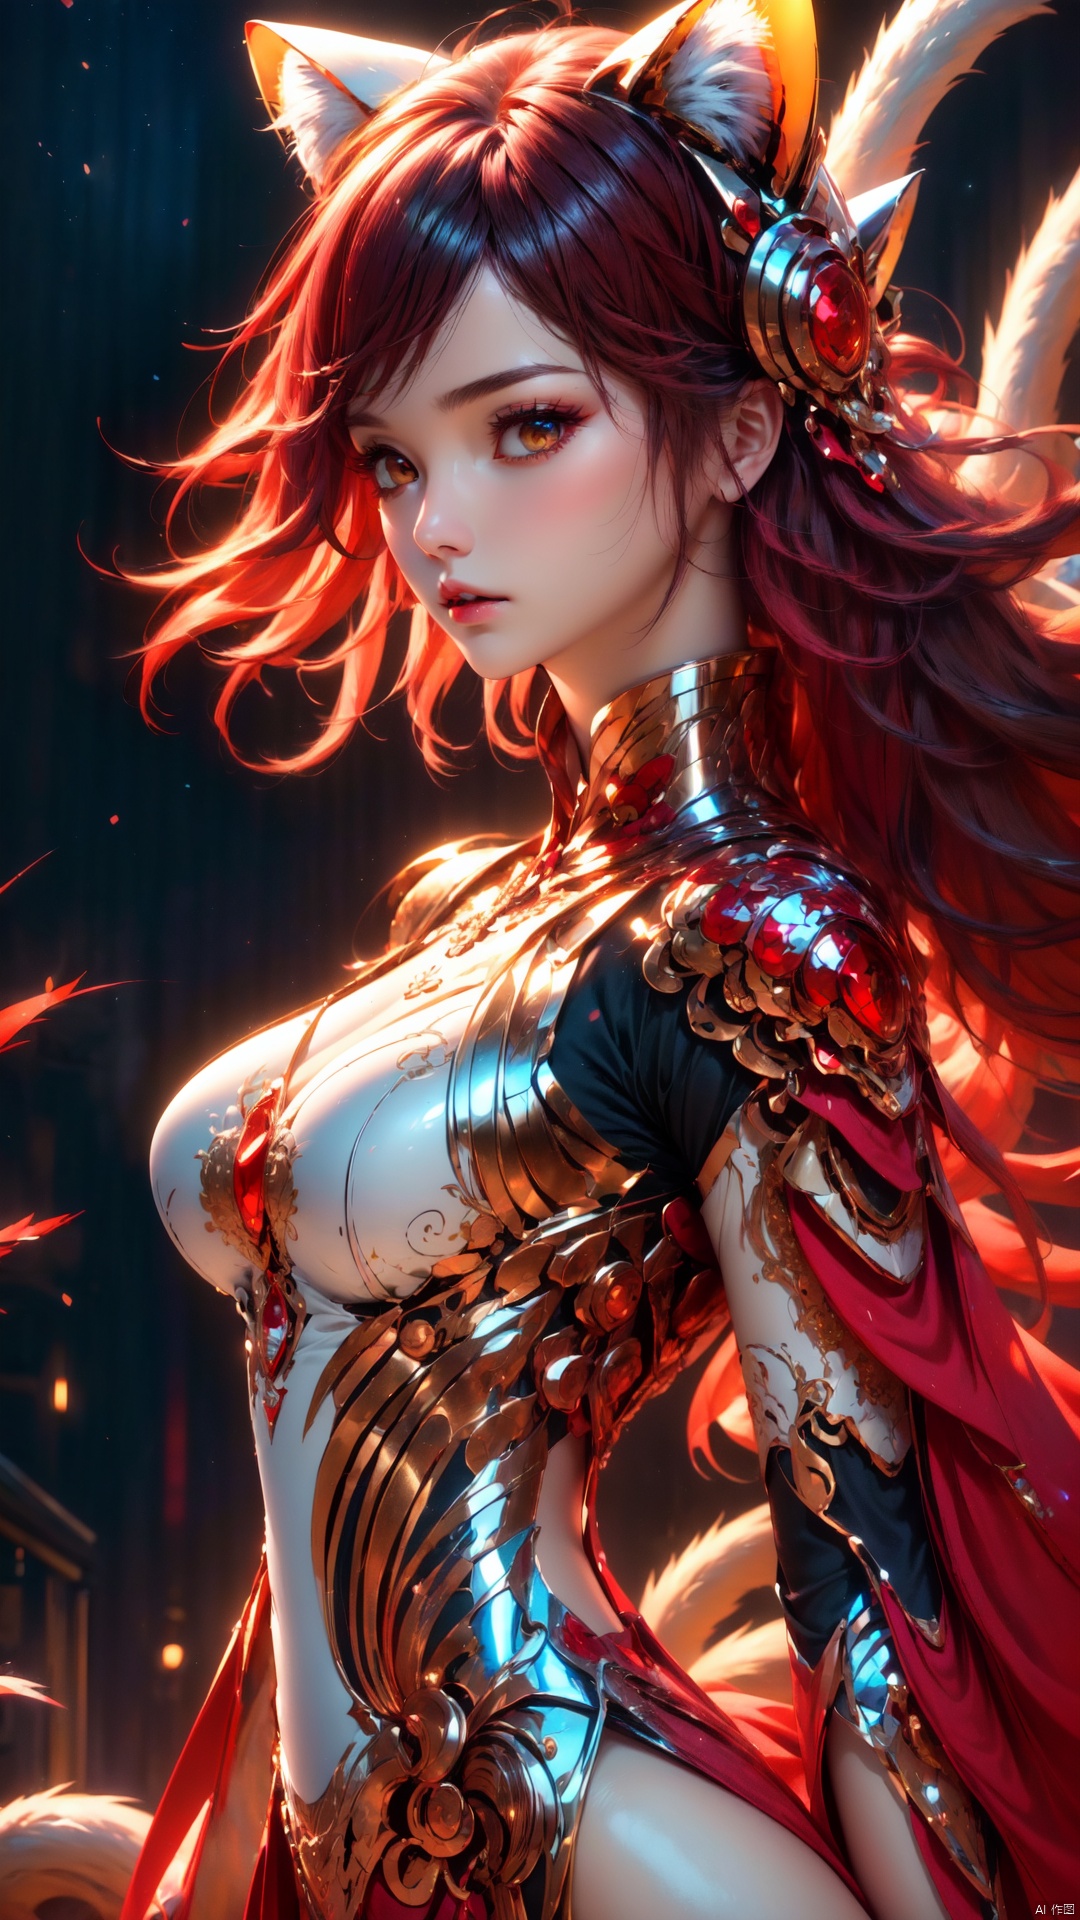 Masterpiece, Top CG rendering, Highest quality, Ultra-clear, Looking Up, (((Nine-tailed cat Spirit))), Long pink hair, Delicate cat ears, Smooth hair, Delicate features, Clear face, Clear eyes, long eyelashes, clear pupils, true lips, light makeup, hot body,  ruddy skin, full breasts, sexy legs. (((The elegant ornate Han dress))), ((The embroidered lace shirt is fairy-like)), lifelike, (((Nine long white-dark cat tails)), close-up, the moon, rendered to a perfect, lifelike, true texture, Realistic photos, cinematography, high quality, studio lighting, top lighting, side backlight, backlight, telephoto, depth depth of field, large depth of field, ultra-clear, 8k quality